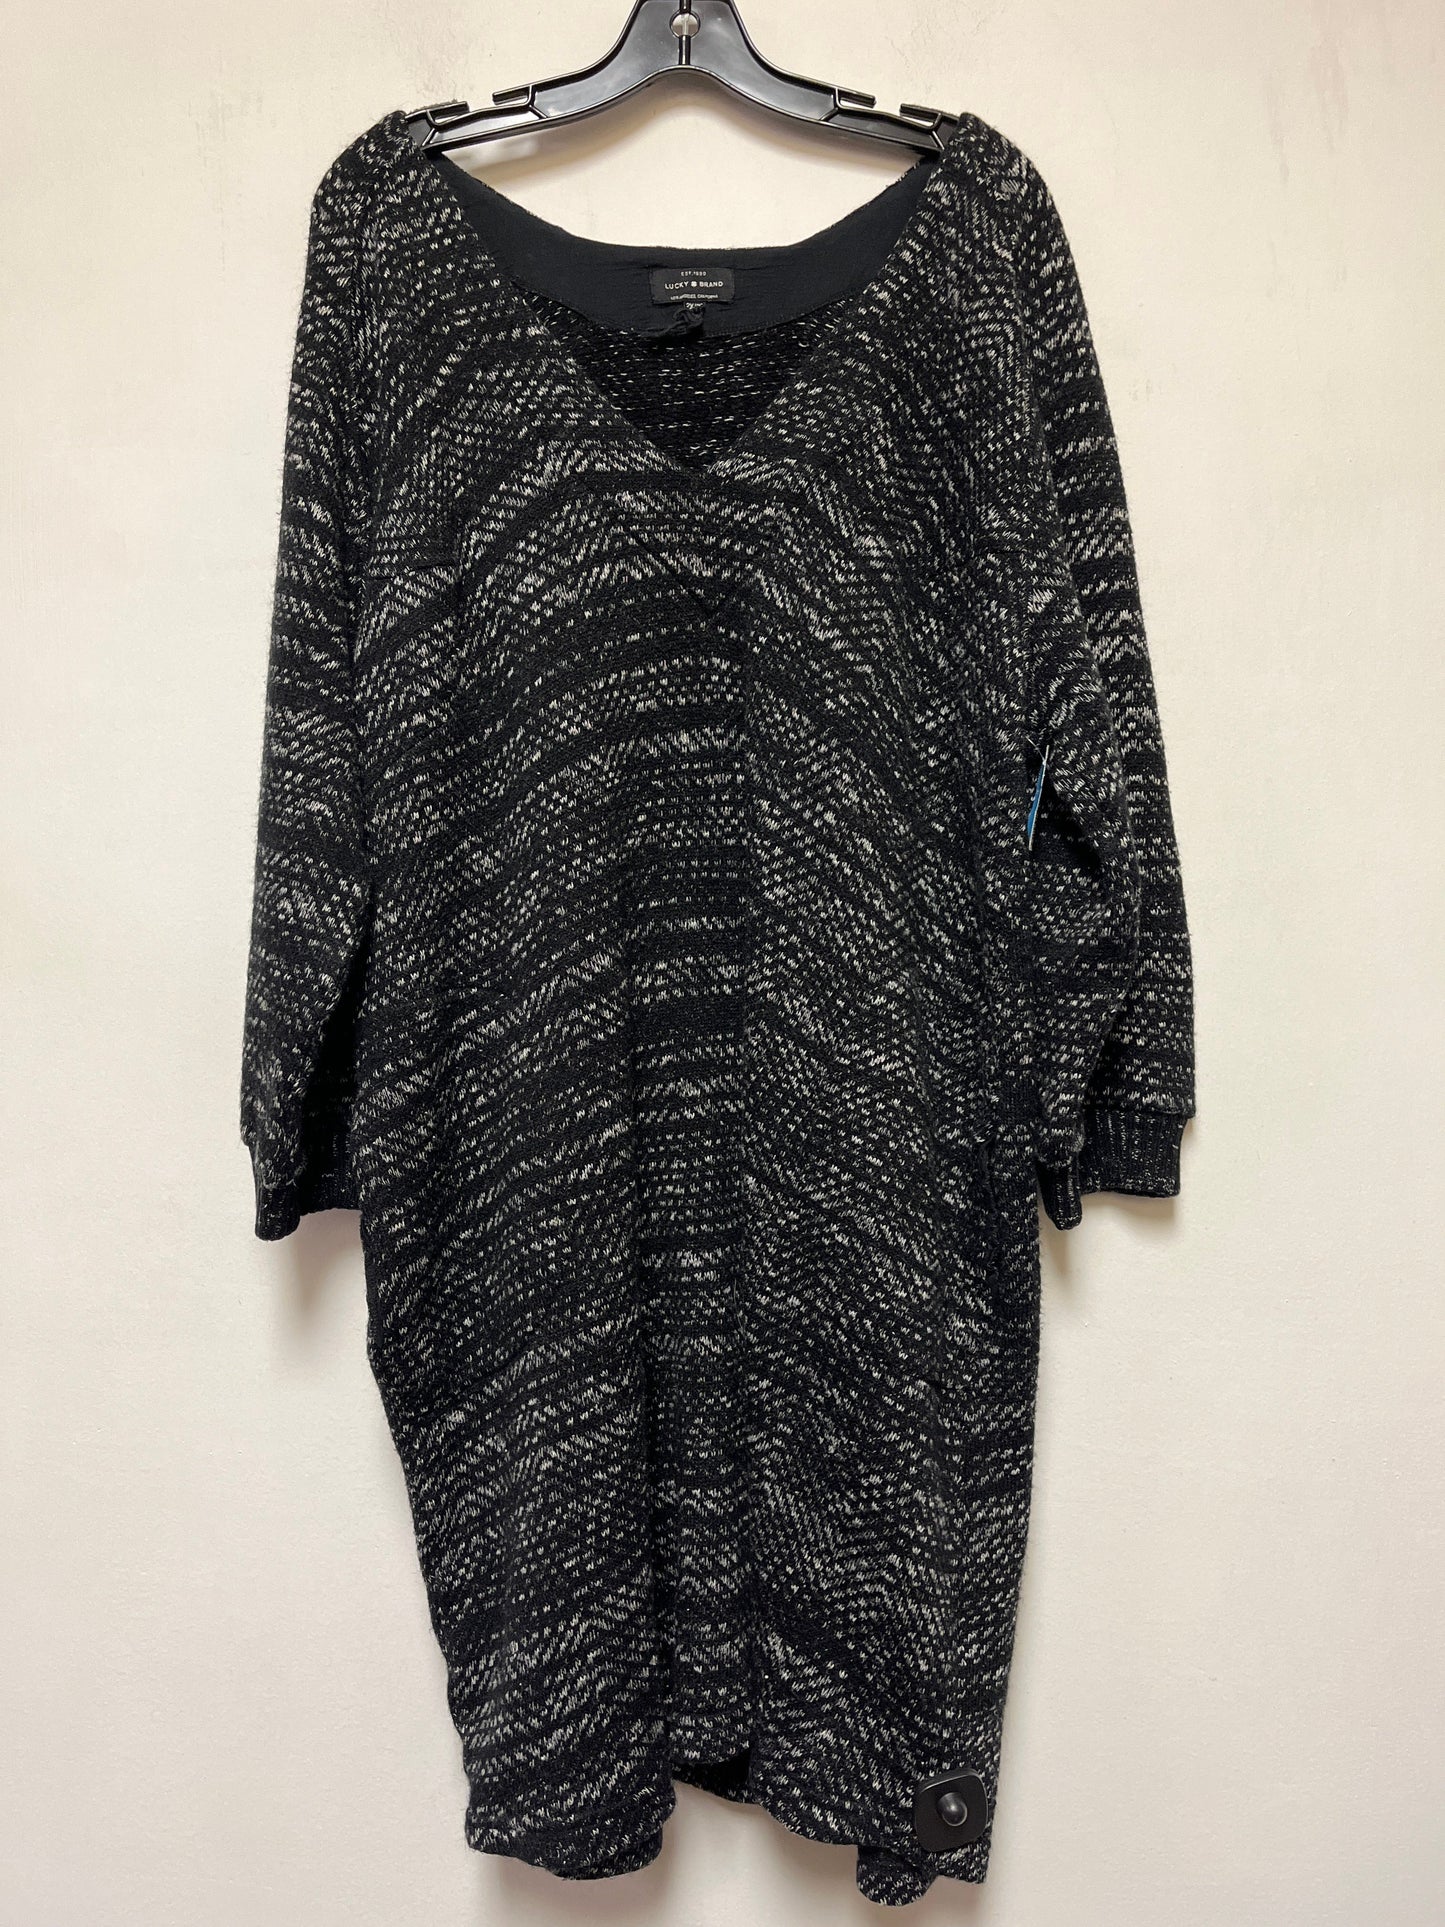 Dress Sweater By Lucky Brand  Size: 2x